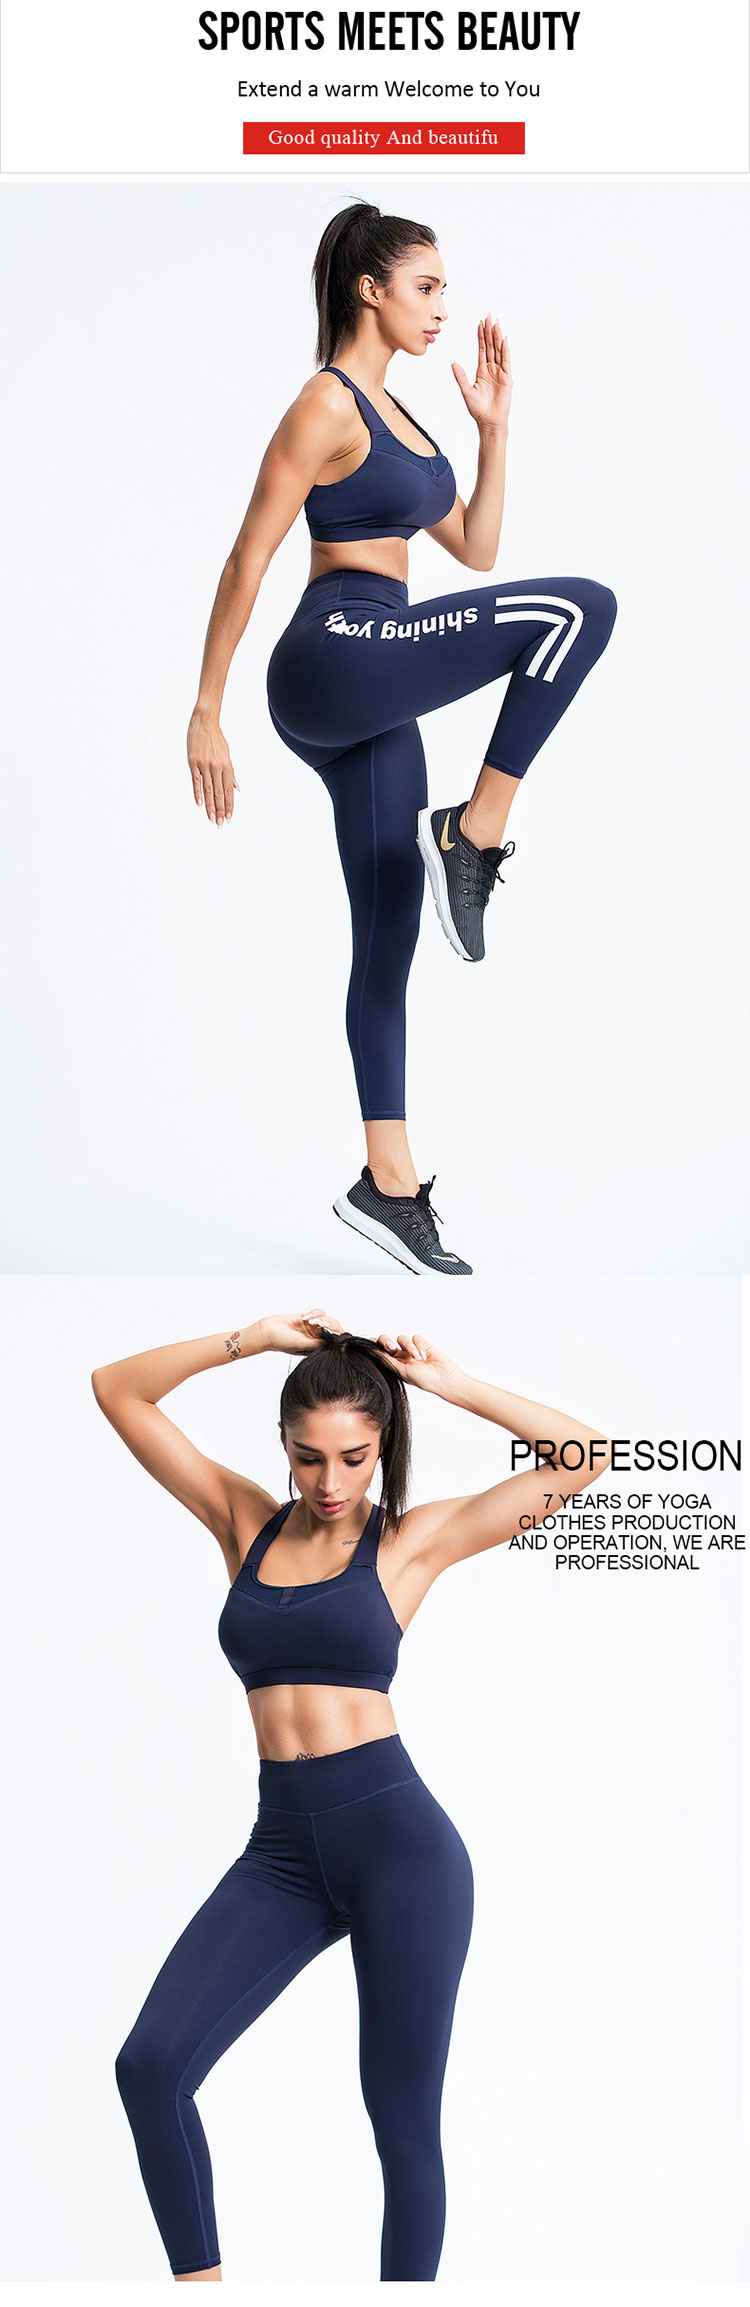 White-gym-leggings-use-power-blue-and-white-as-the-main-colors